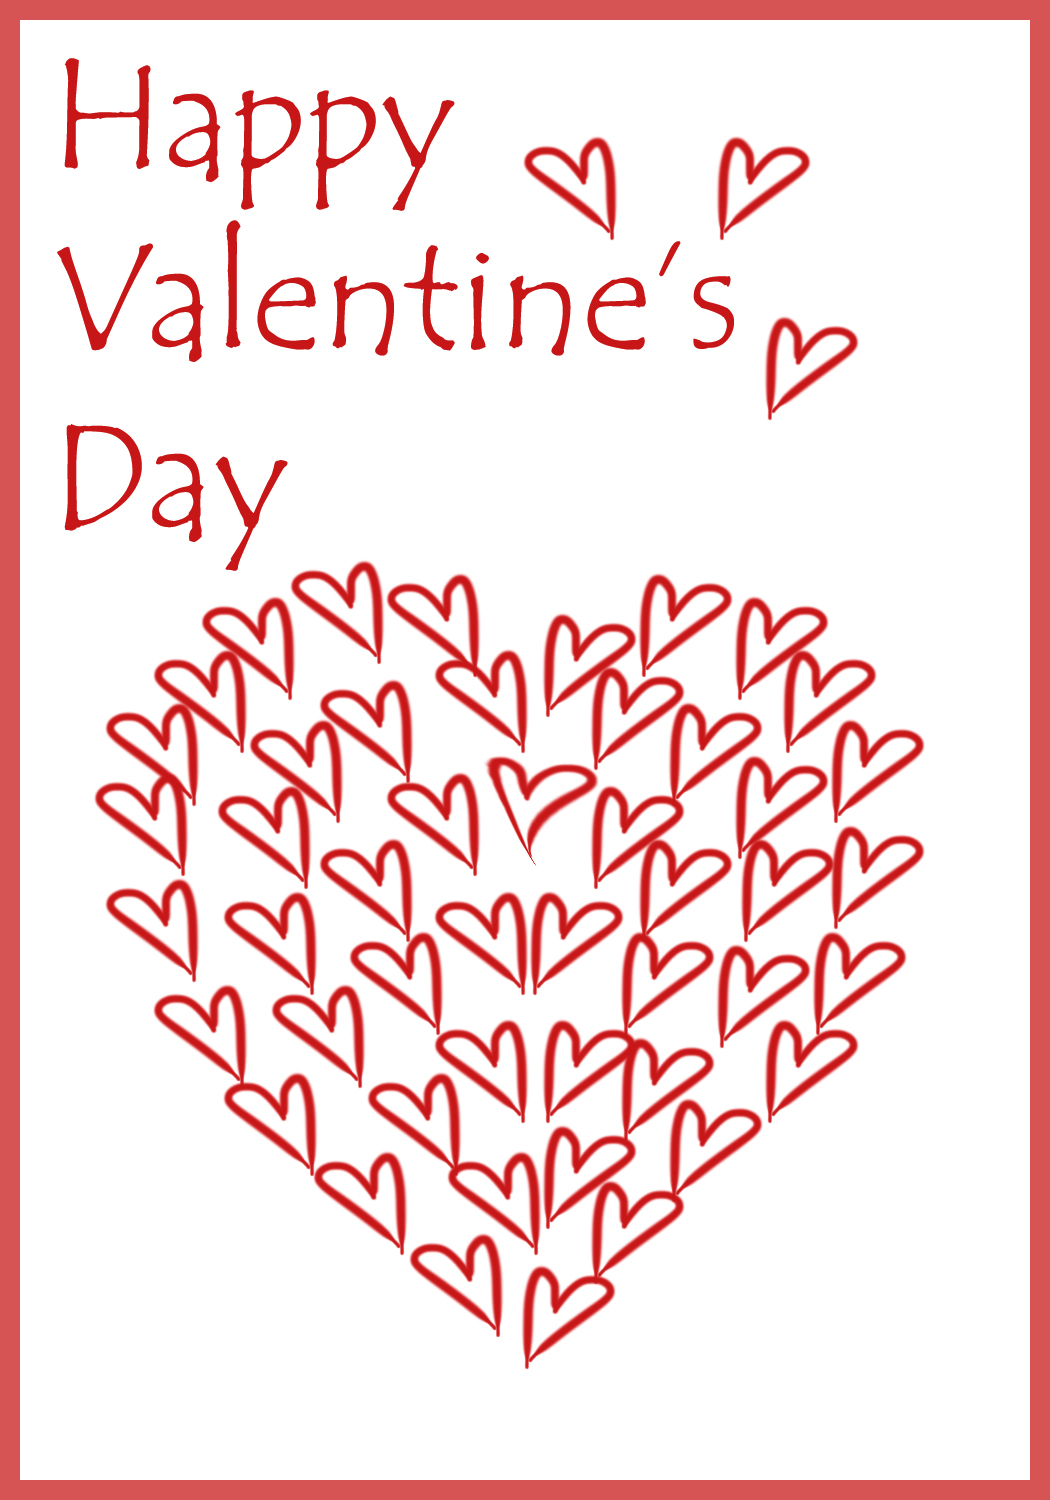 free-online-printable-valentines-day-cards-printable-templates